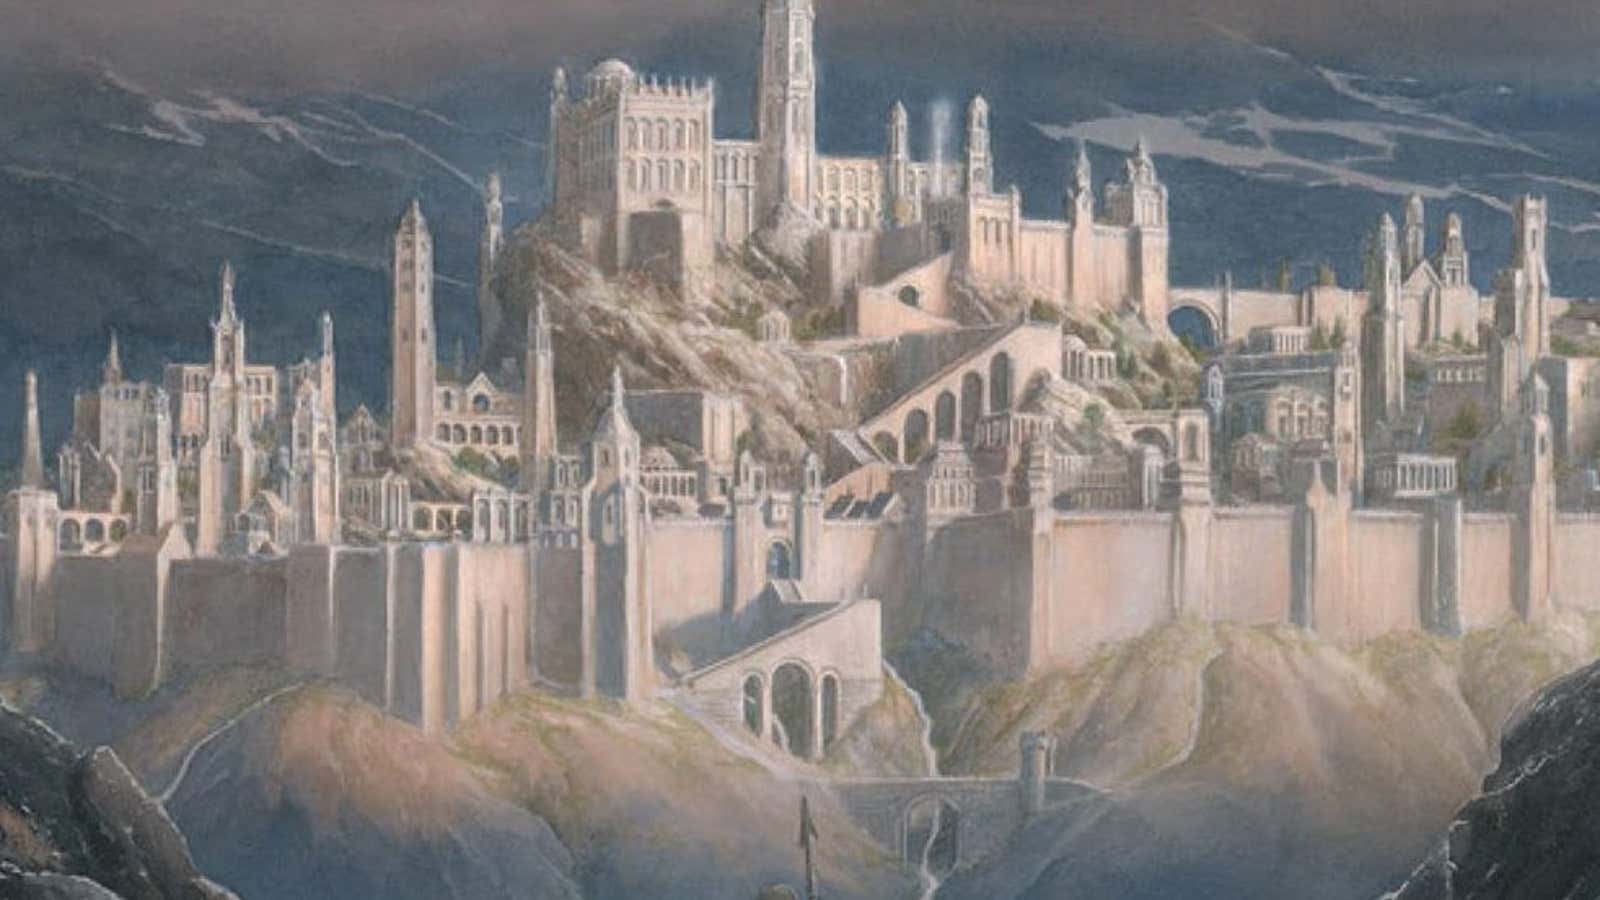 A newly published version of an obscure Tolkien story is a gift to superfans